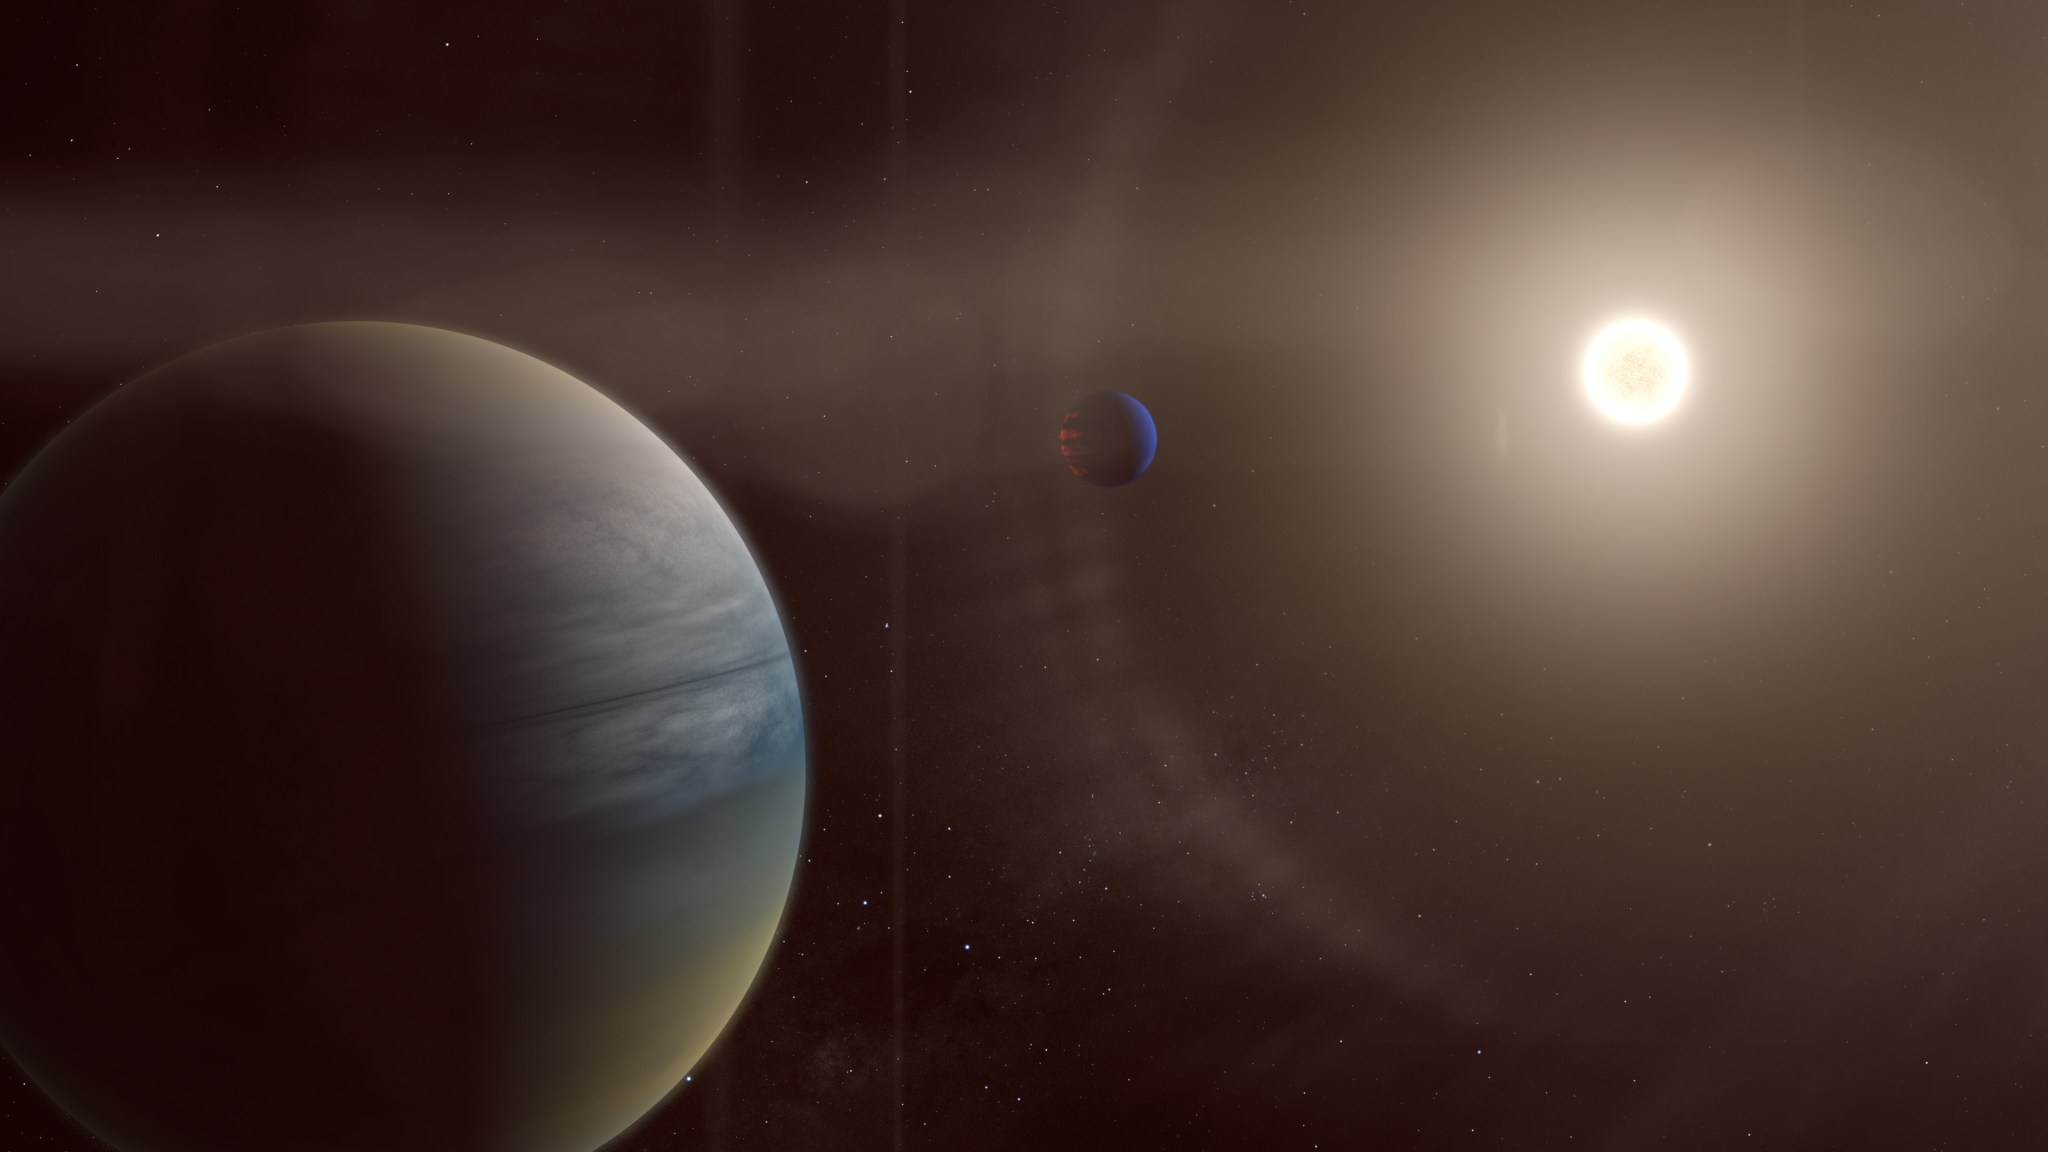 Two gaseous planets orbit the bright star